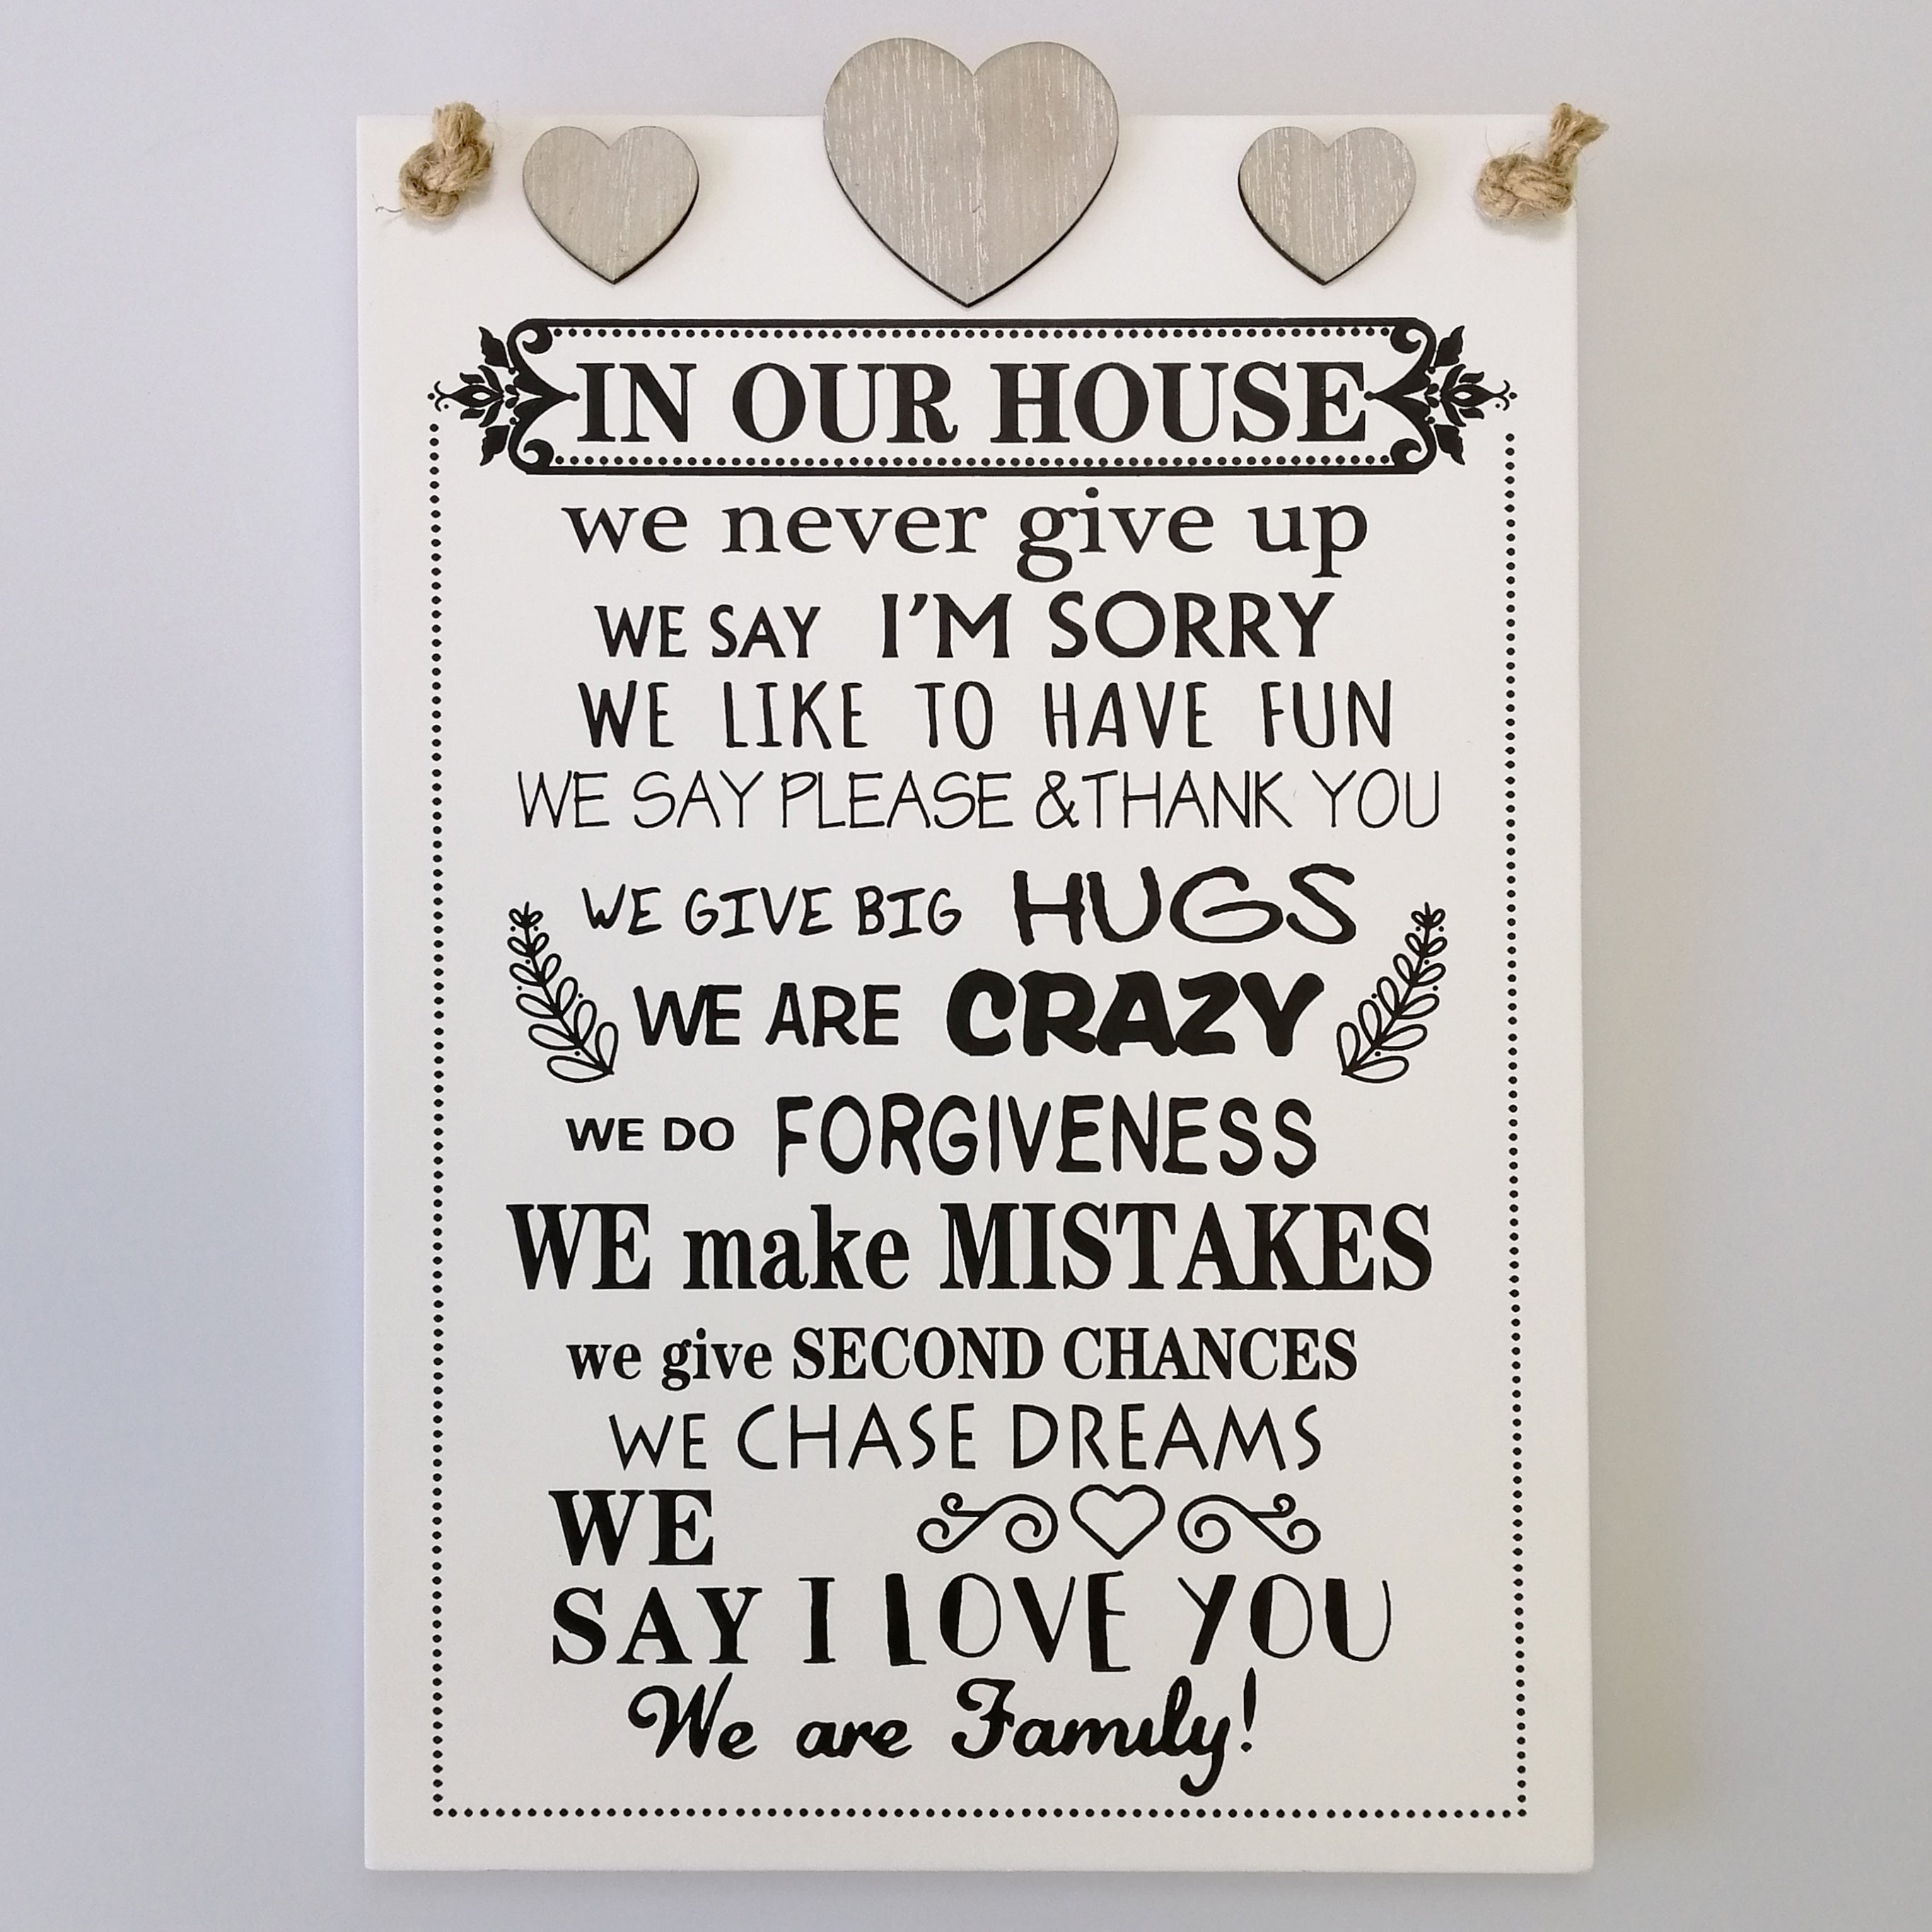 In Our House' Large Plaque Sign